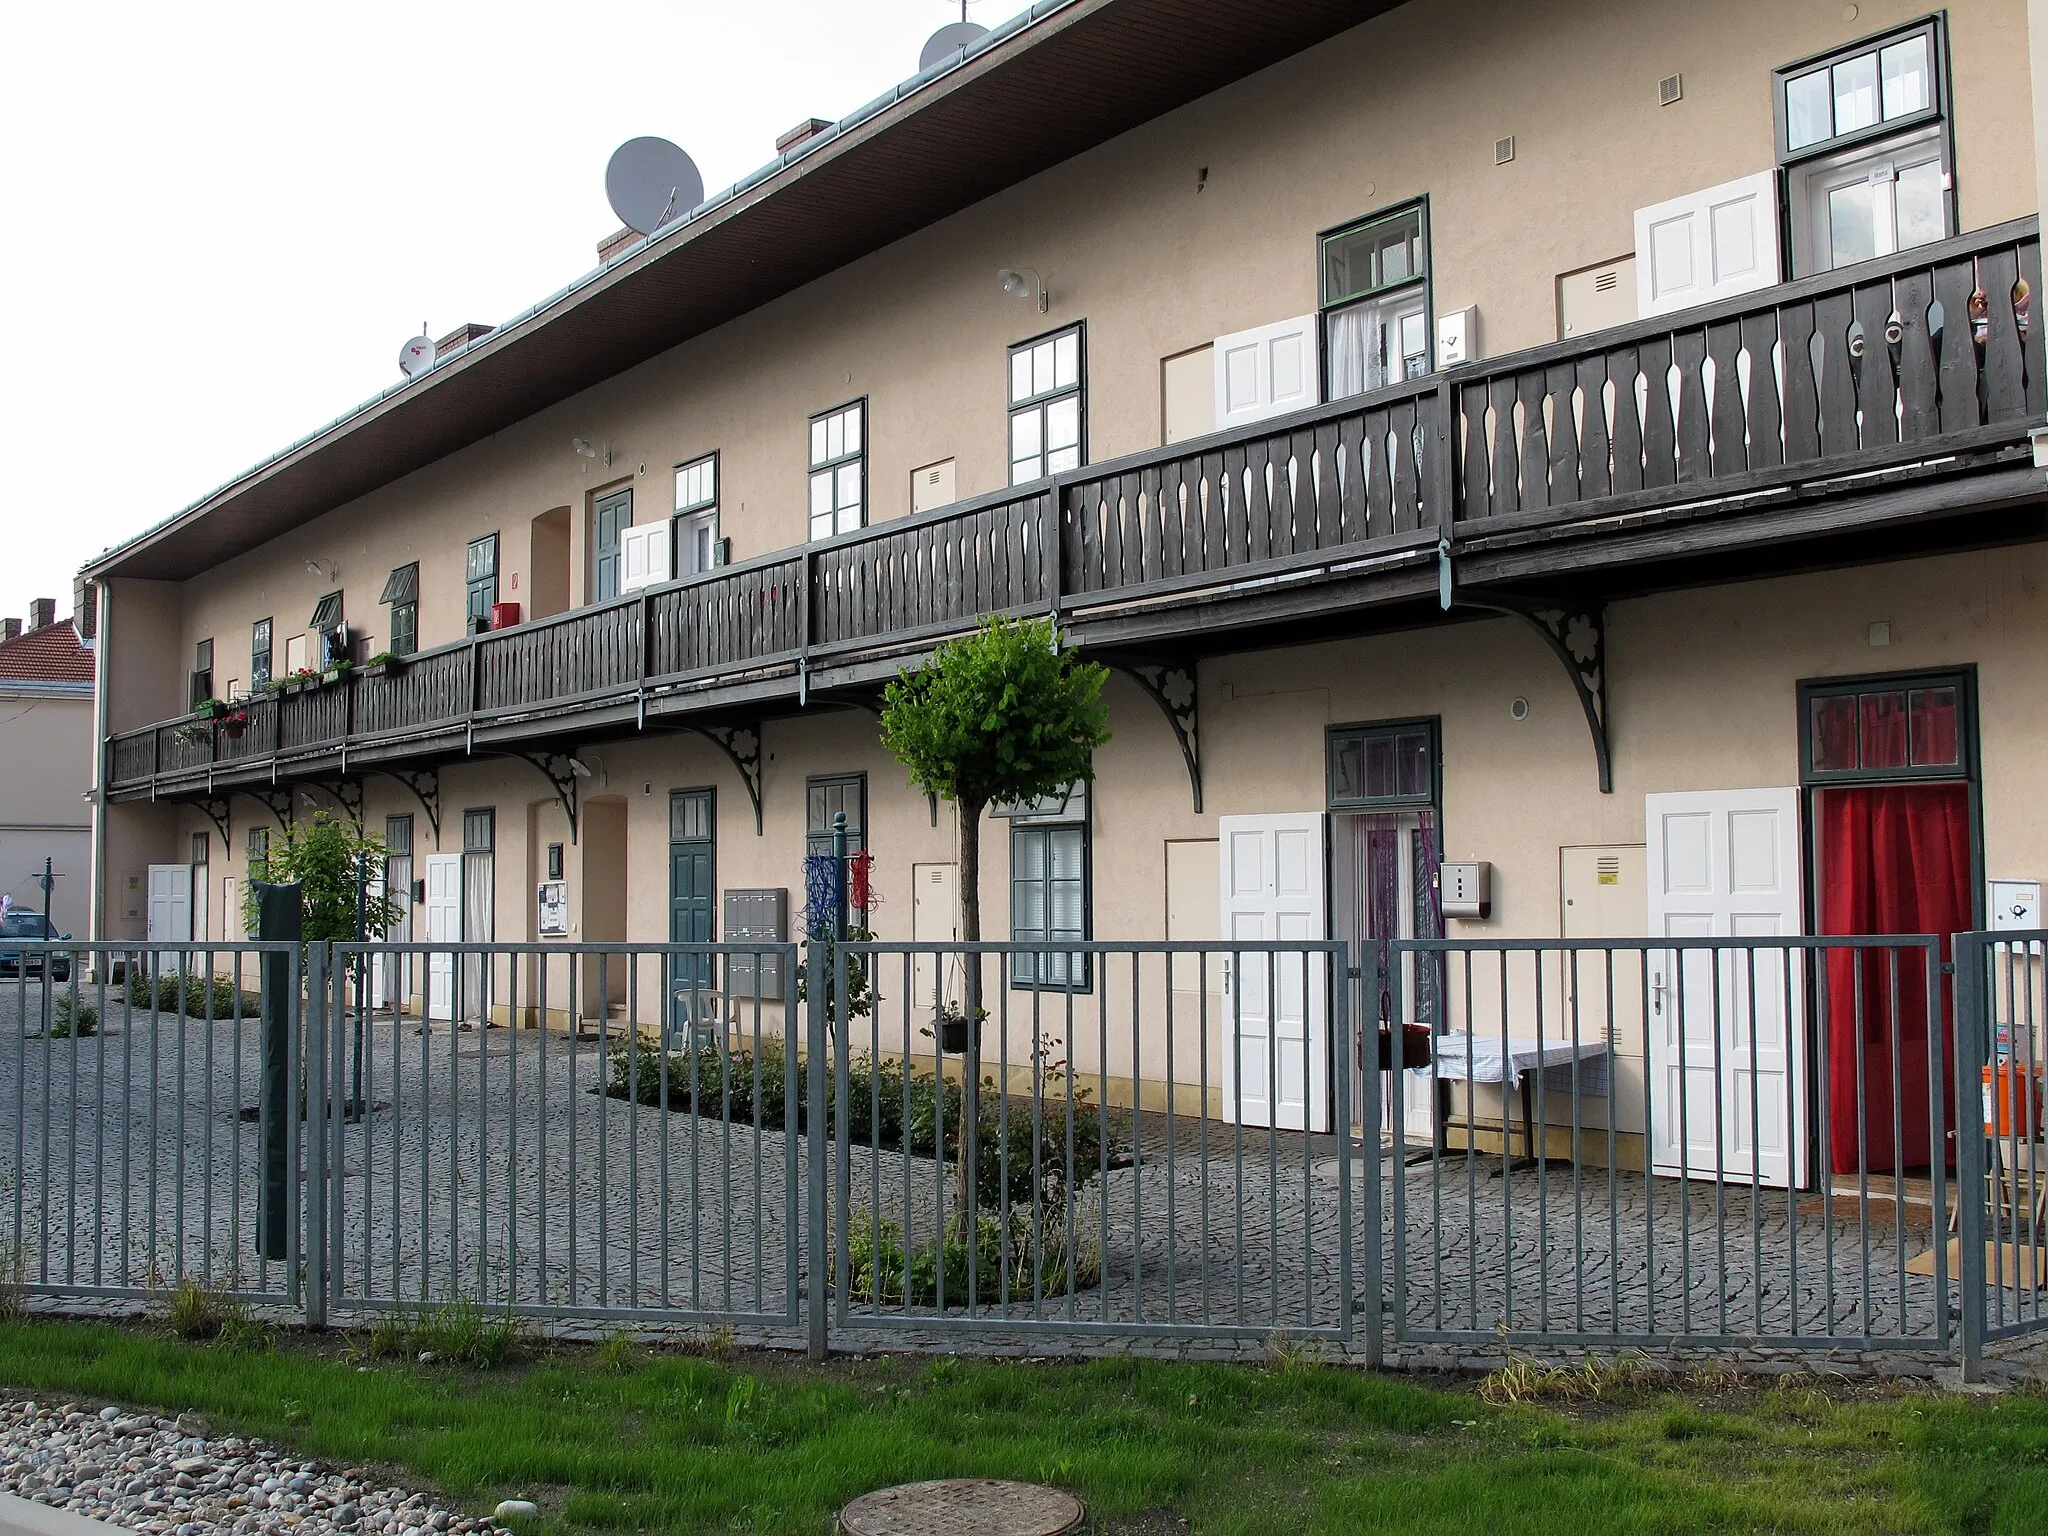 Photo showing: Former working class neighborhood in Marienthal Gramatneusiedl / District Wien-Umgebung / Lower Austria / Austria / EU, where Paul Lazarsfeld's study The unemployed of Marienthal conducted. The apartments were not on a staircase, but from the outside on a balcony (Pawlatschen) available. On the roof there are satellite dishes. The settlement was restored several years ago.